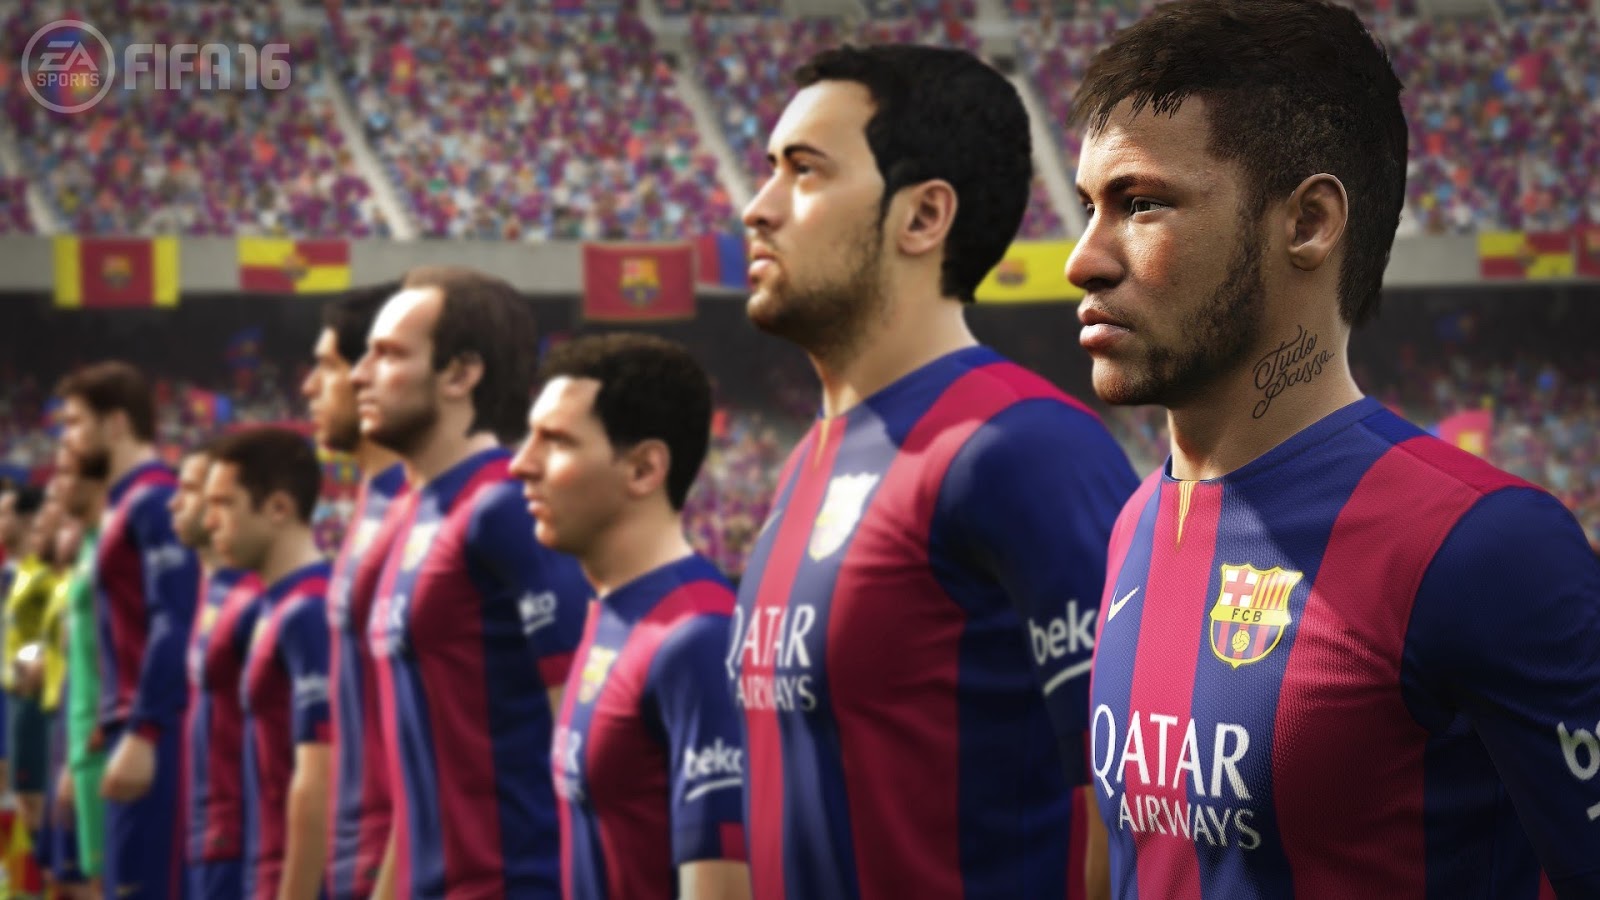 fifa 16 full  torrent download for pc